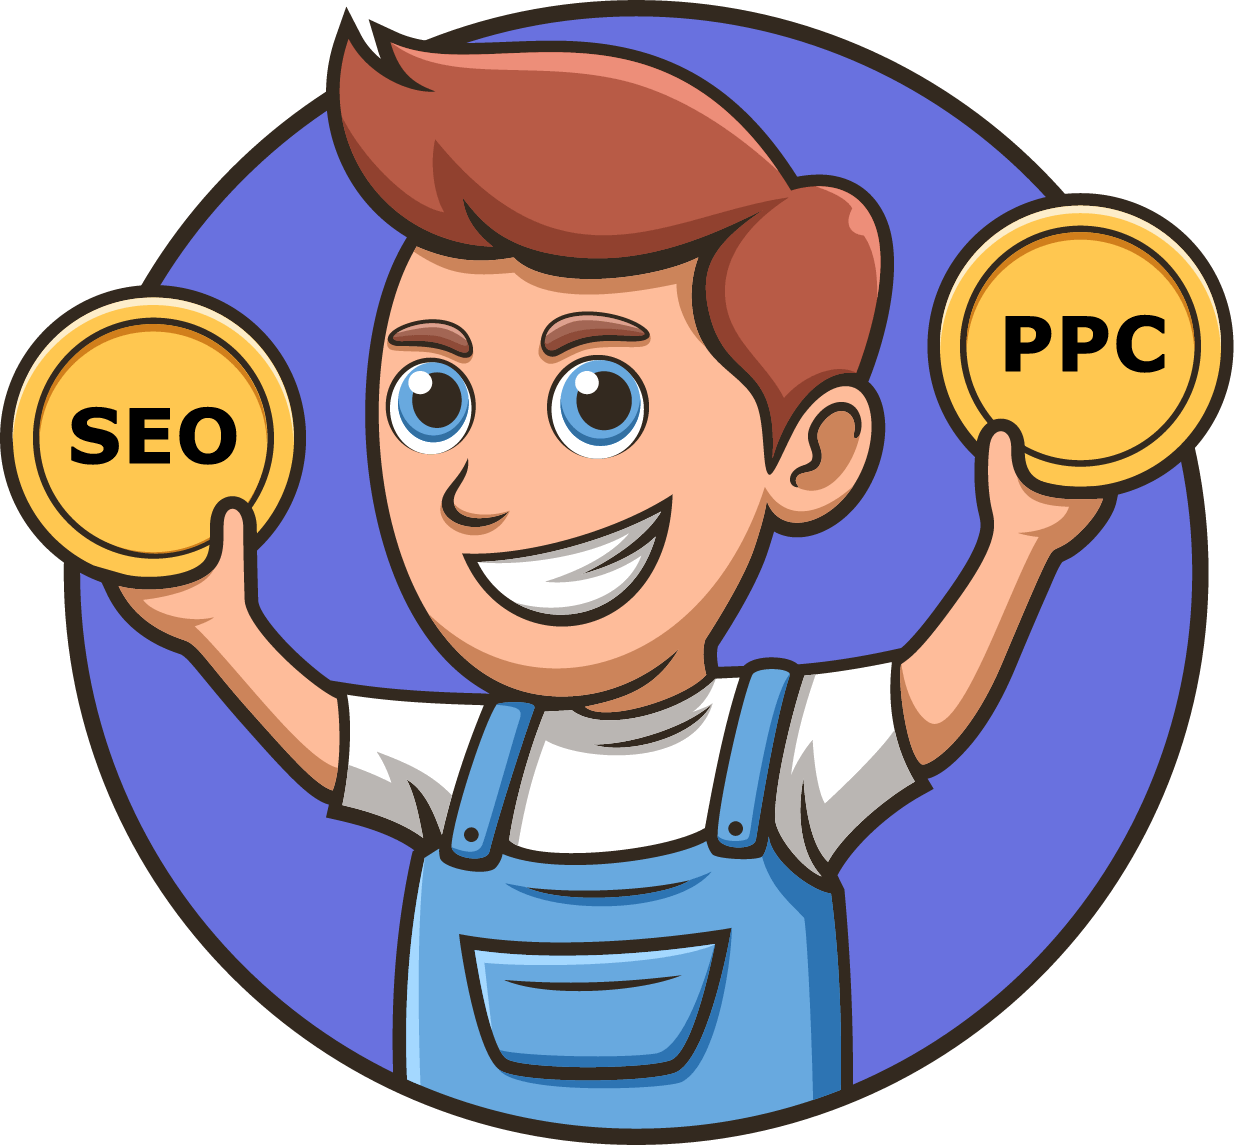 SEO and PPC are two sides of the same coin